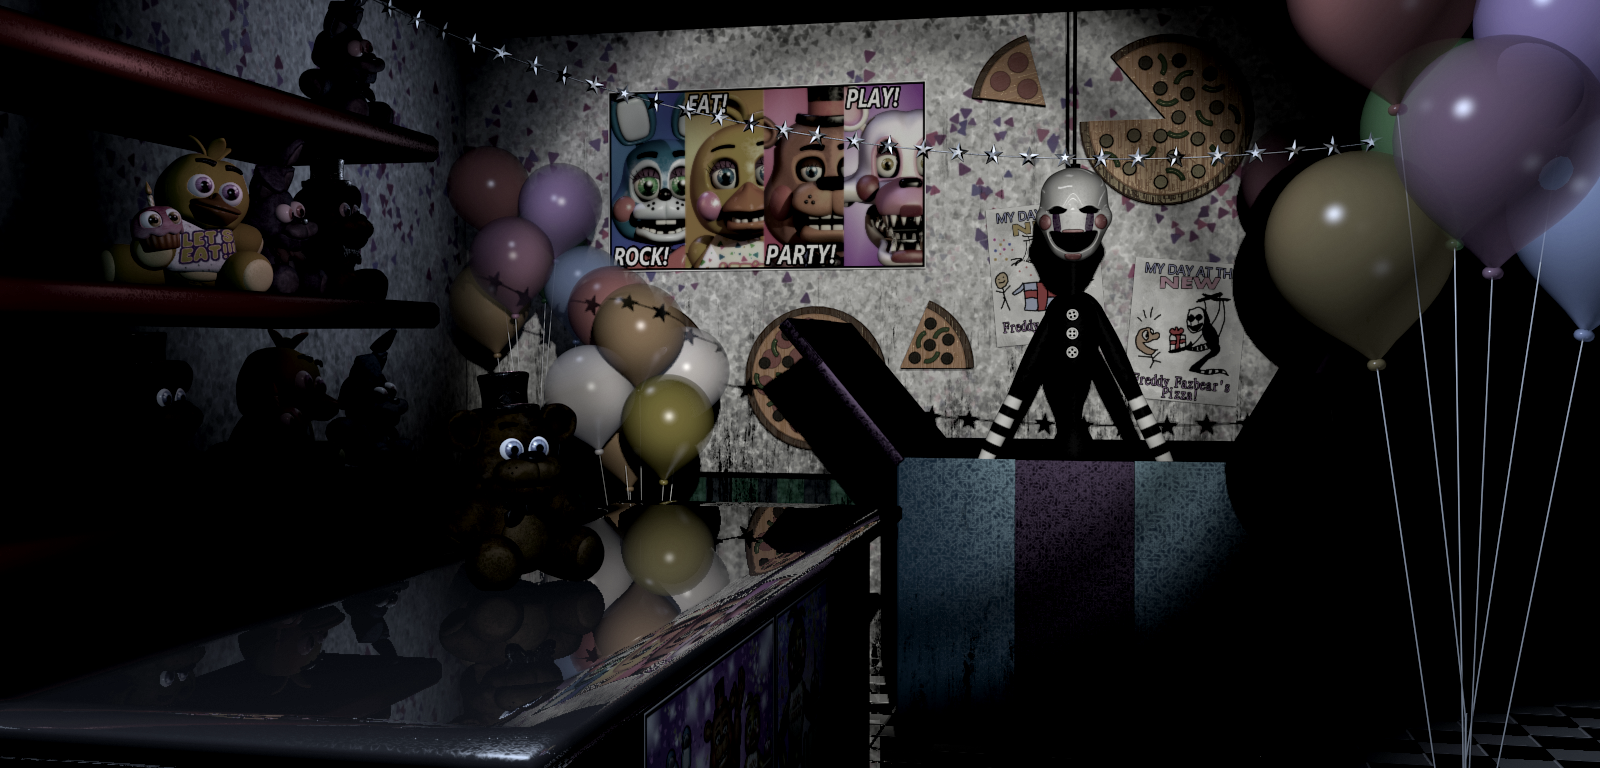 The Puppet, Five Nights at Freddy's Wiki